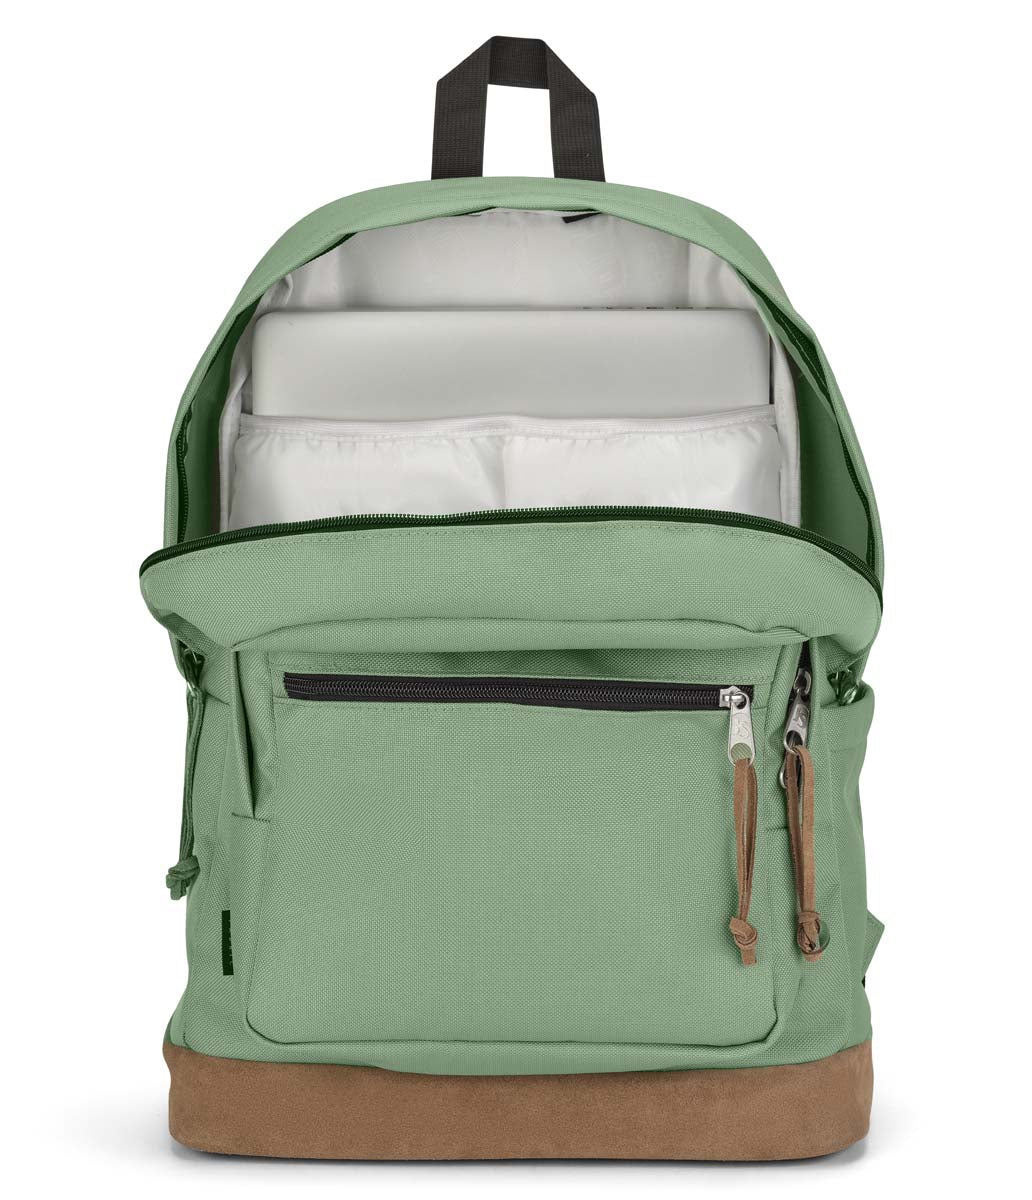 JANSPORT RIGHT PACK LODEN FROST